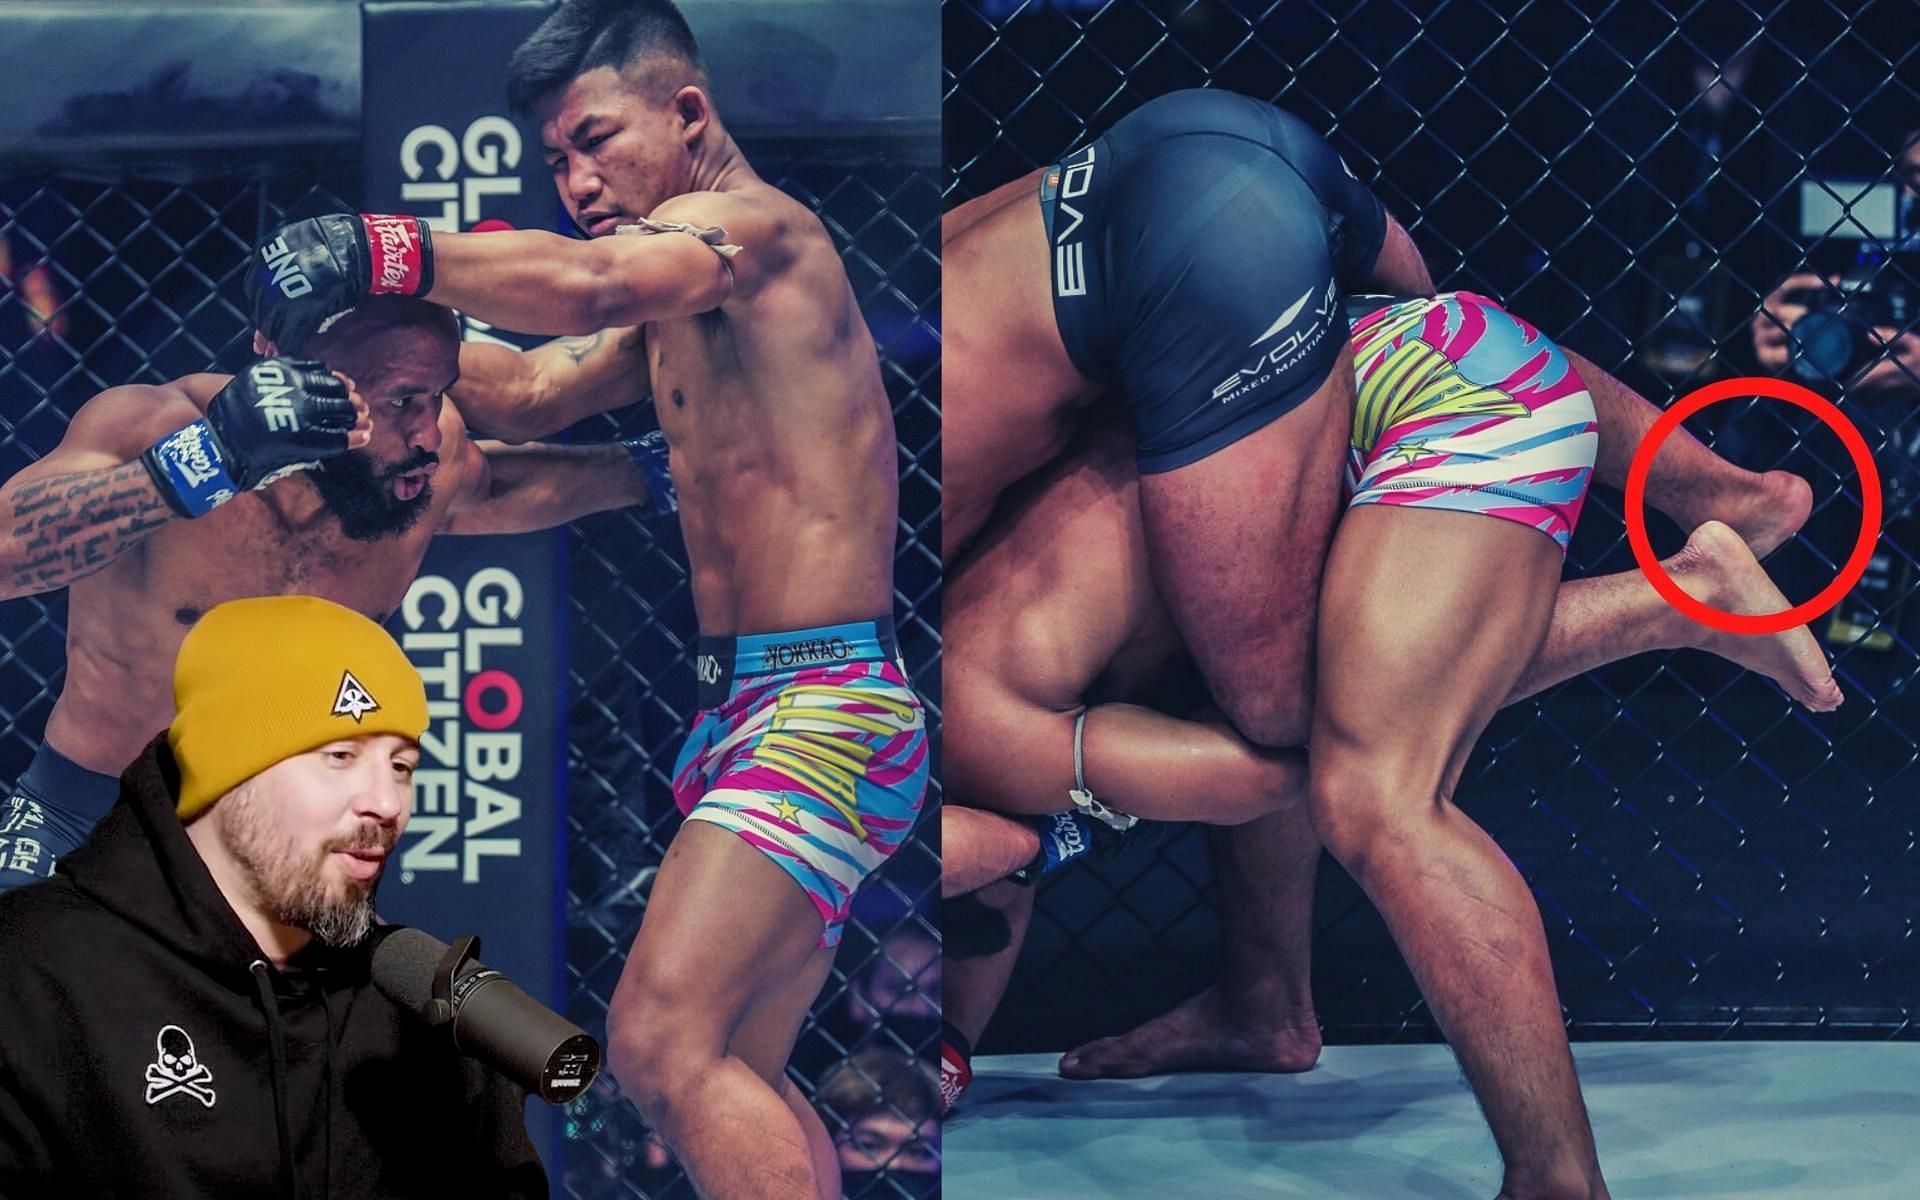 Dan Hardy (lower left) provide an interesting analysis of the mixed-rules fight between Demetrious Johnson and Rodtang Jitmuangnon. (Images courtesy: ONE Championship, Full Reptile&#039;s YouTube channel)